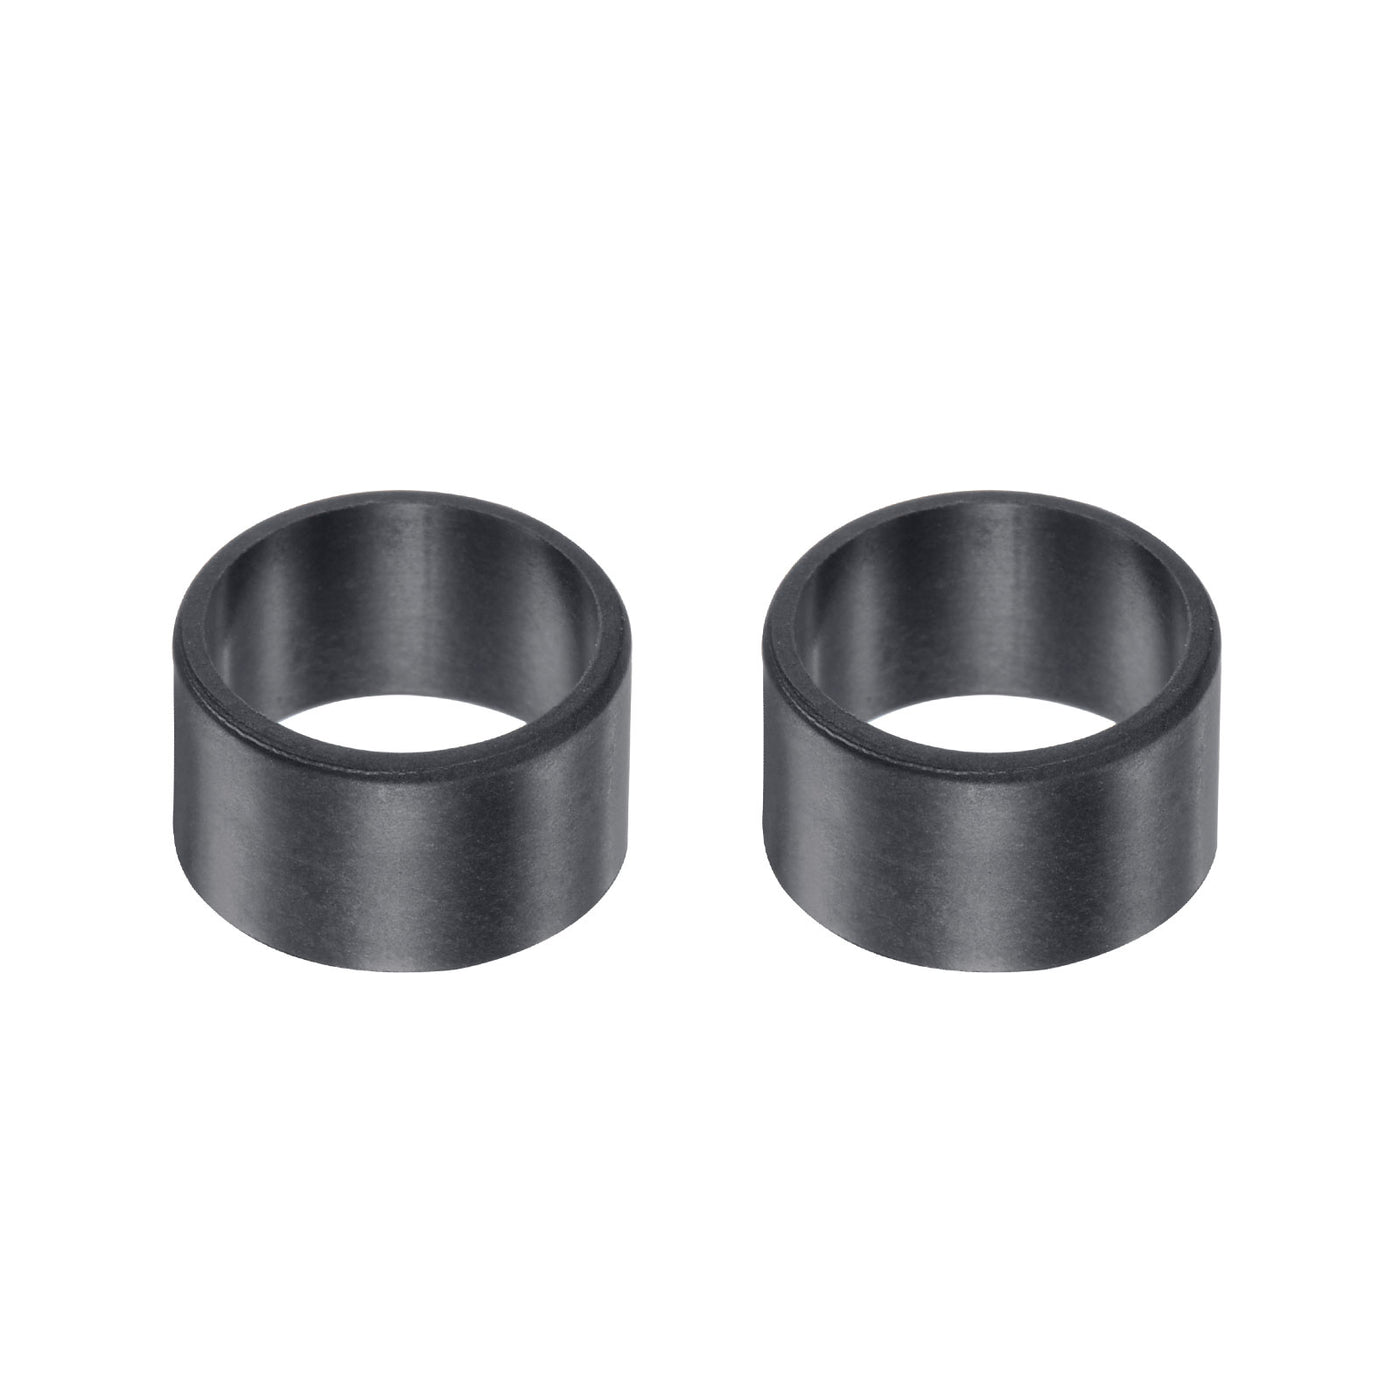 uxcell Uxcell Sleeve Bearings 12mmx14mmx8mm POM Wrapped Oilless Bushings Black 2pcs